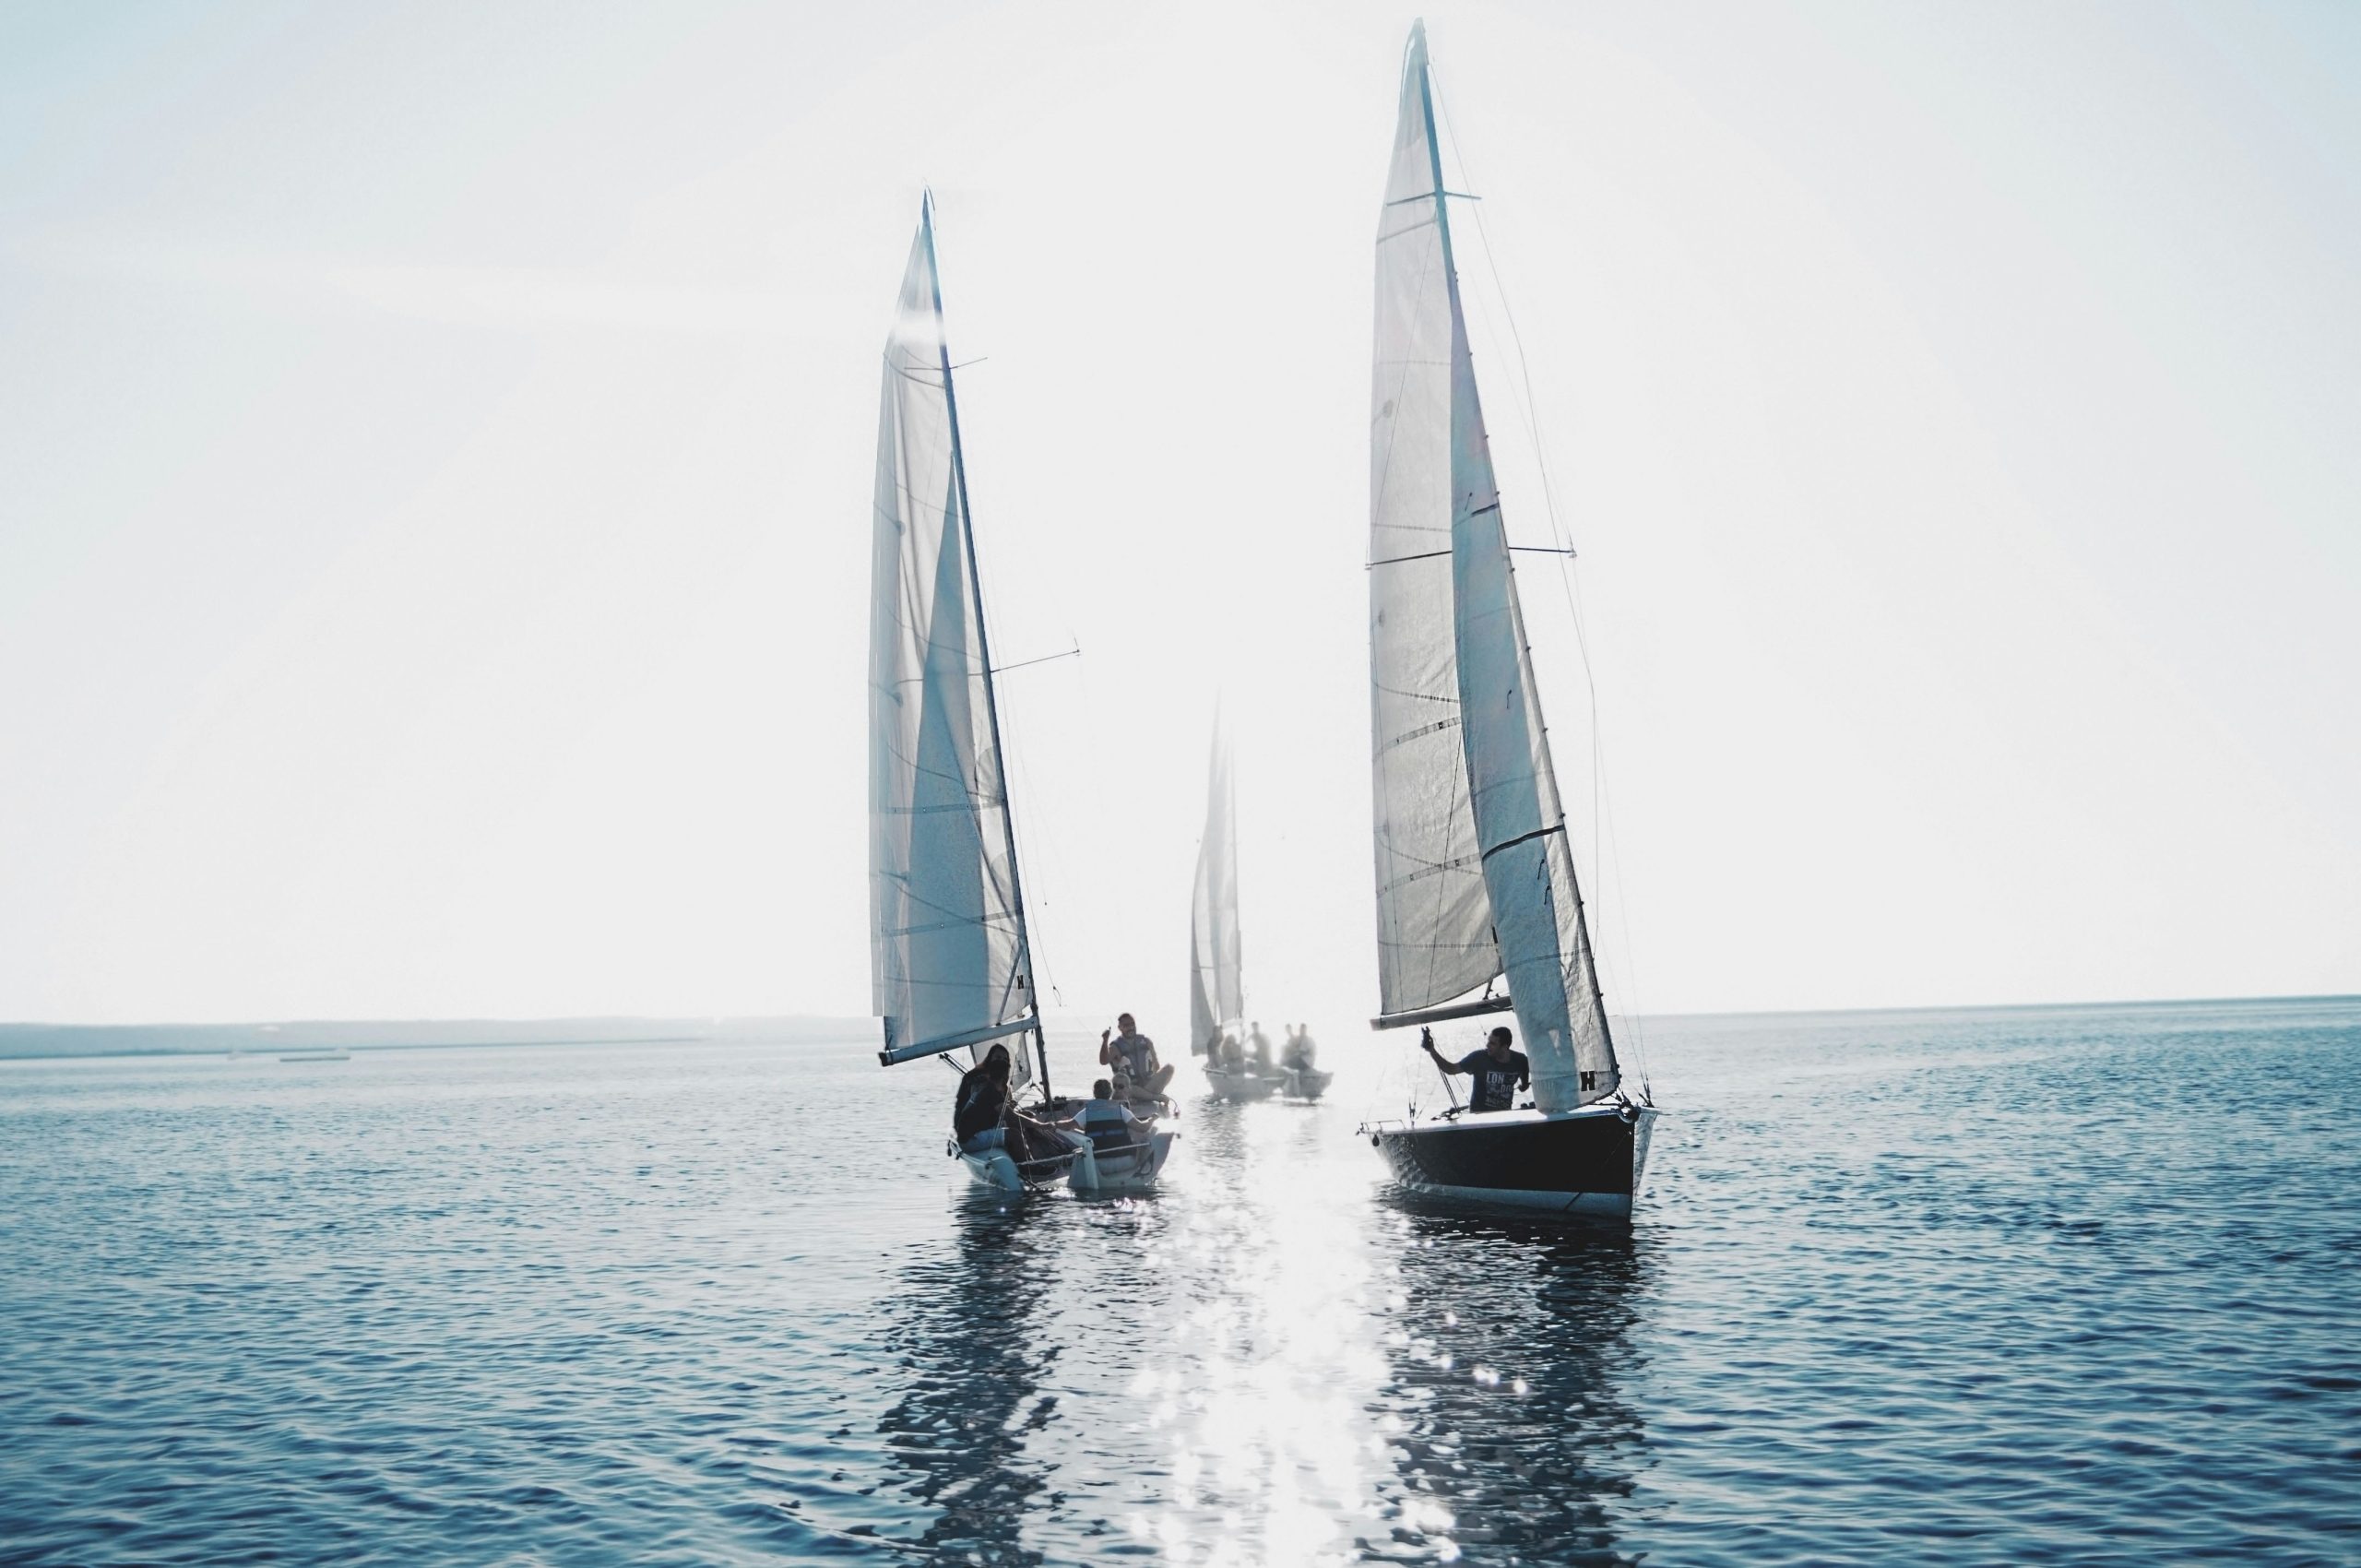 explore the wonders of sailing with our comprehensive guide. learn the basics, find the best destinations, and uncover expert tips for a memorable adventure at sea.